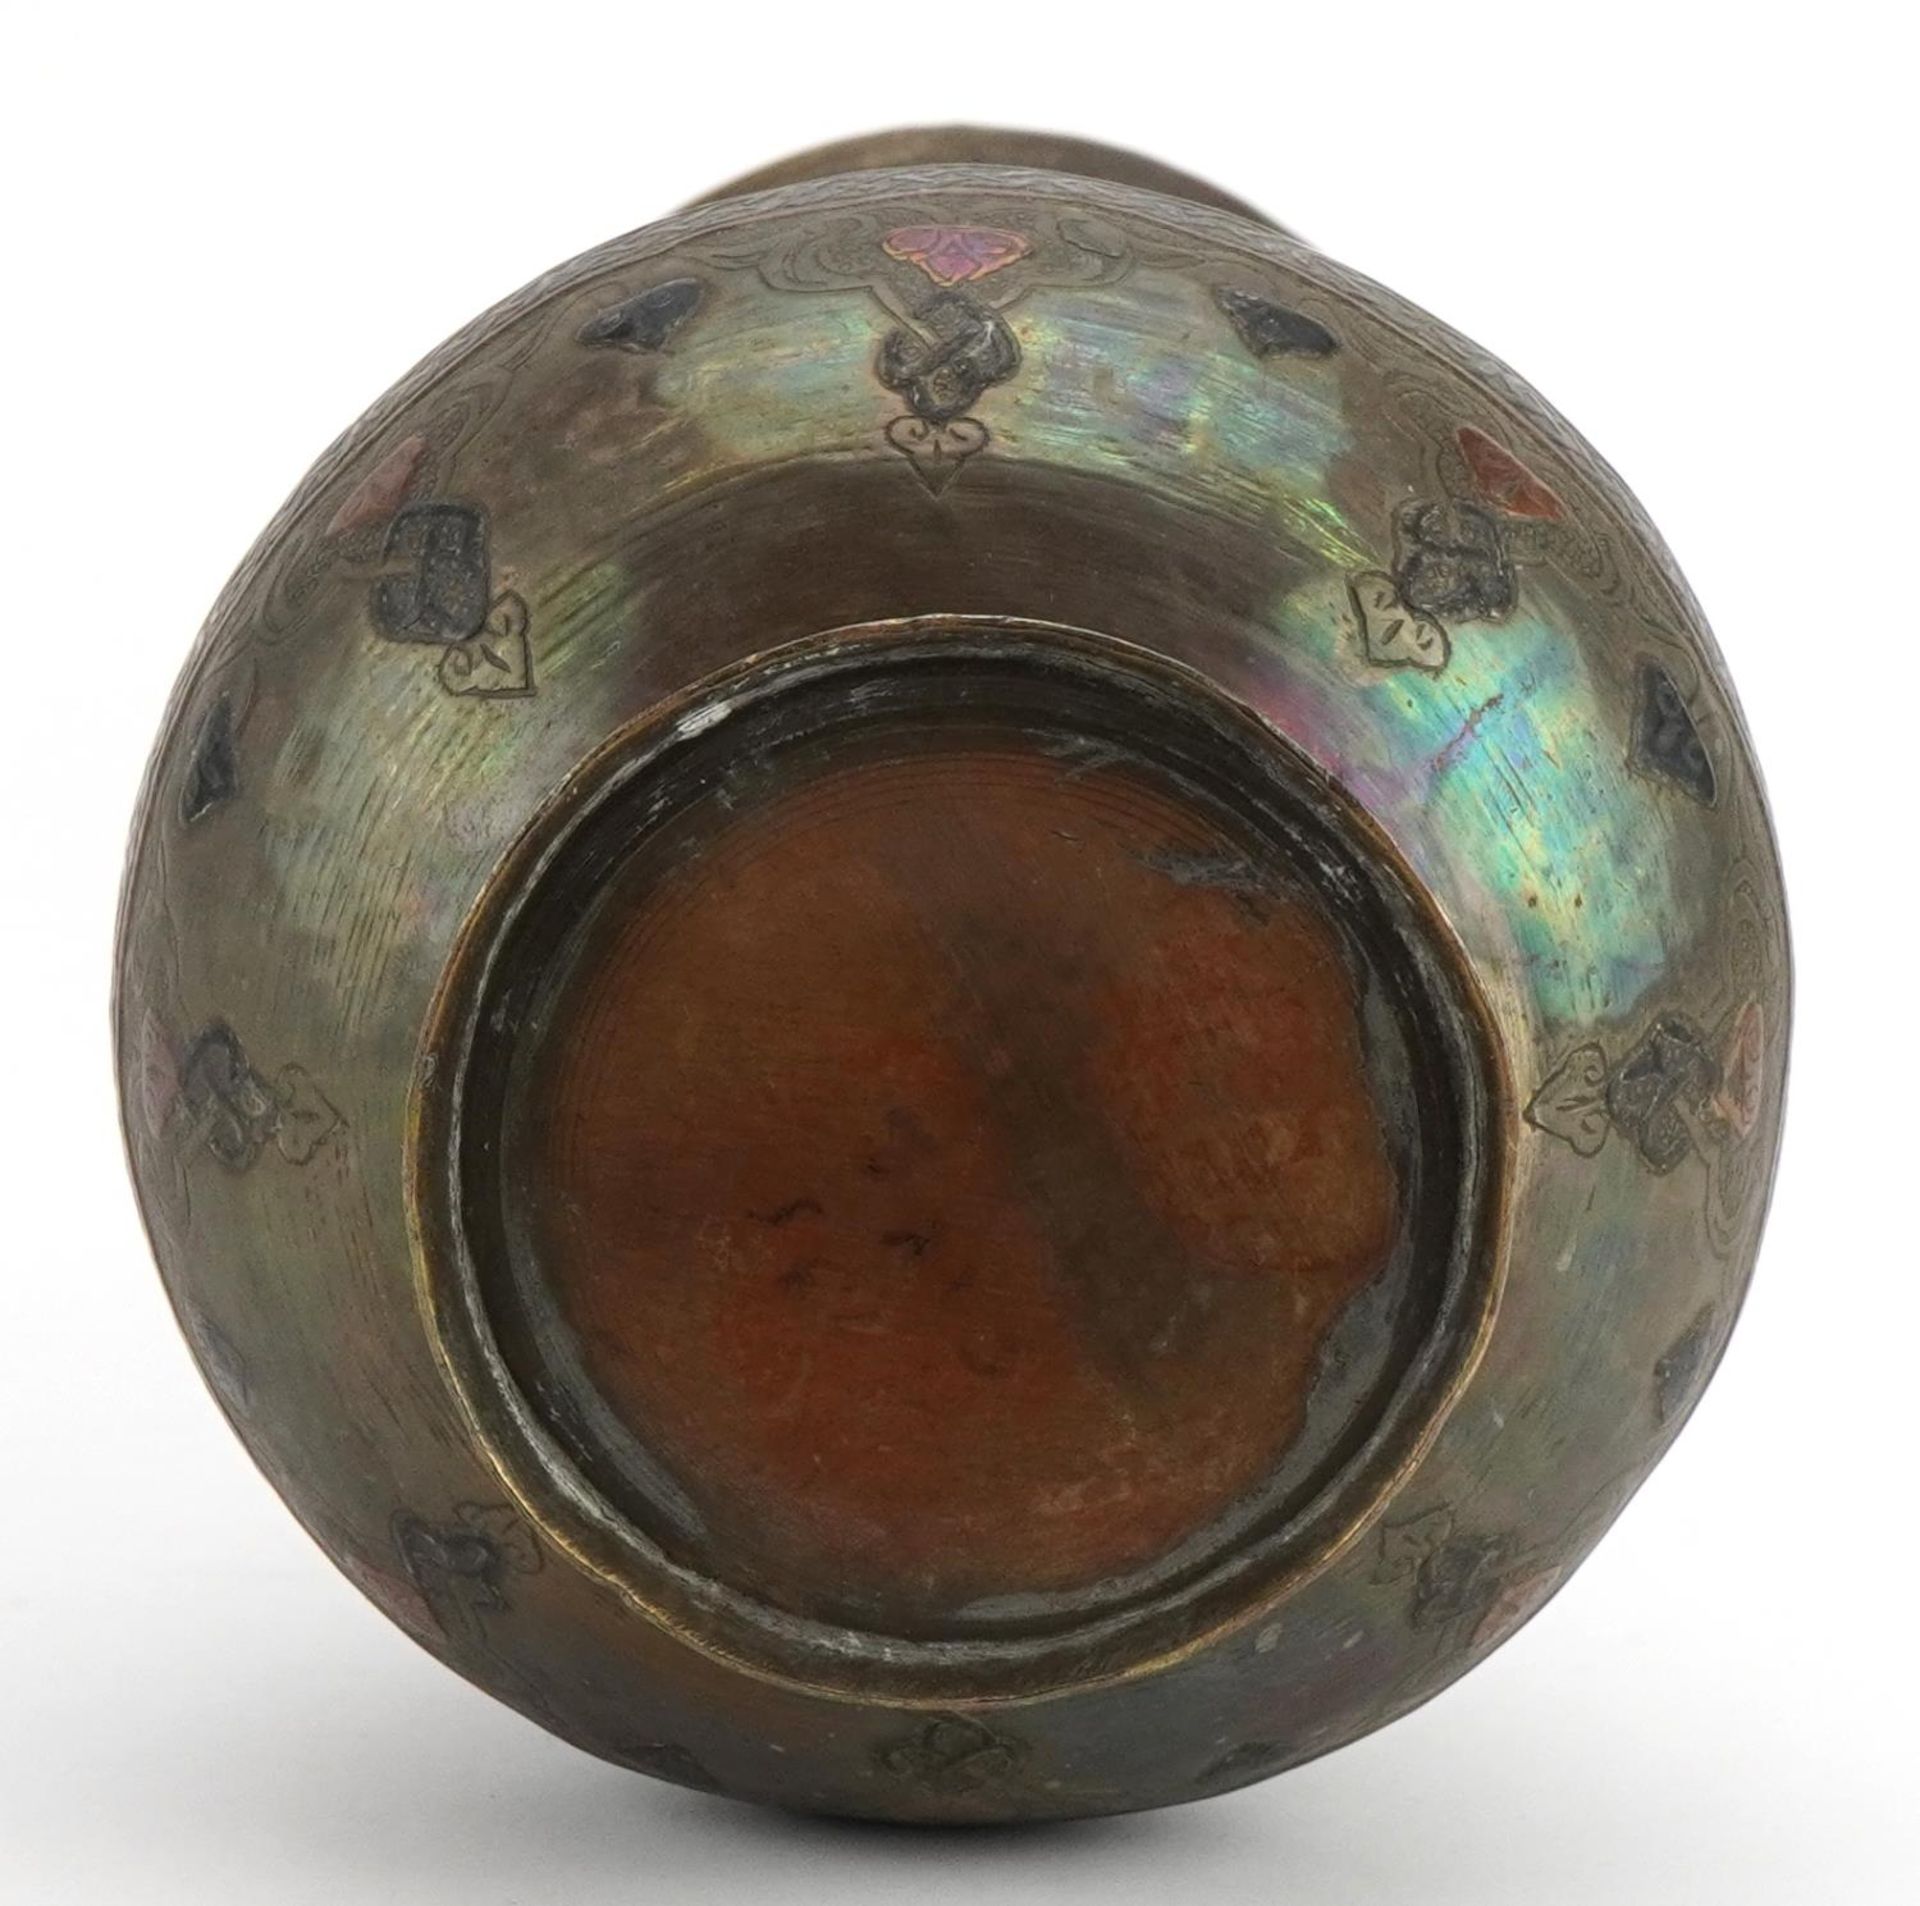 Islamic Cairoware brass vase with silver and copper inlay decorated with calligraphy and flowers, - Image 3 of 3